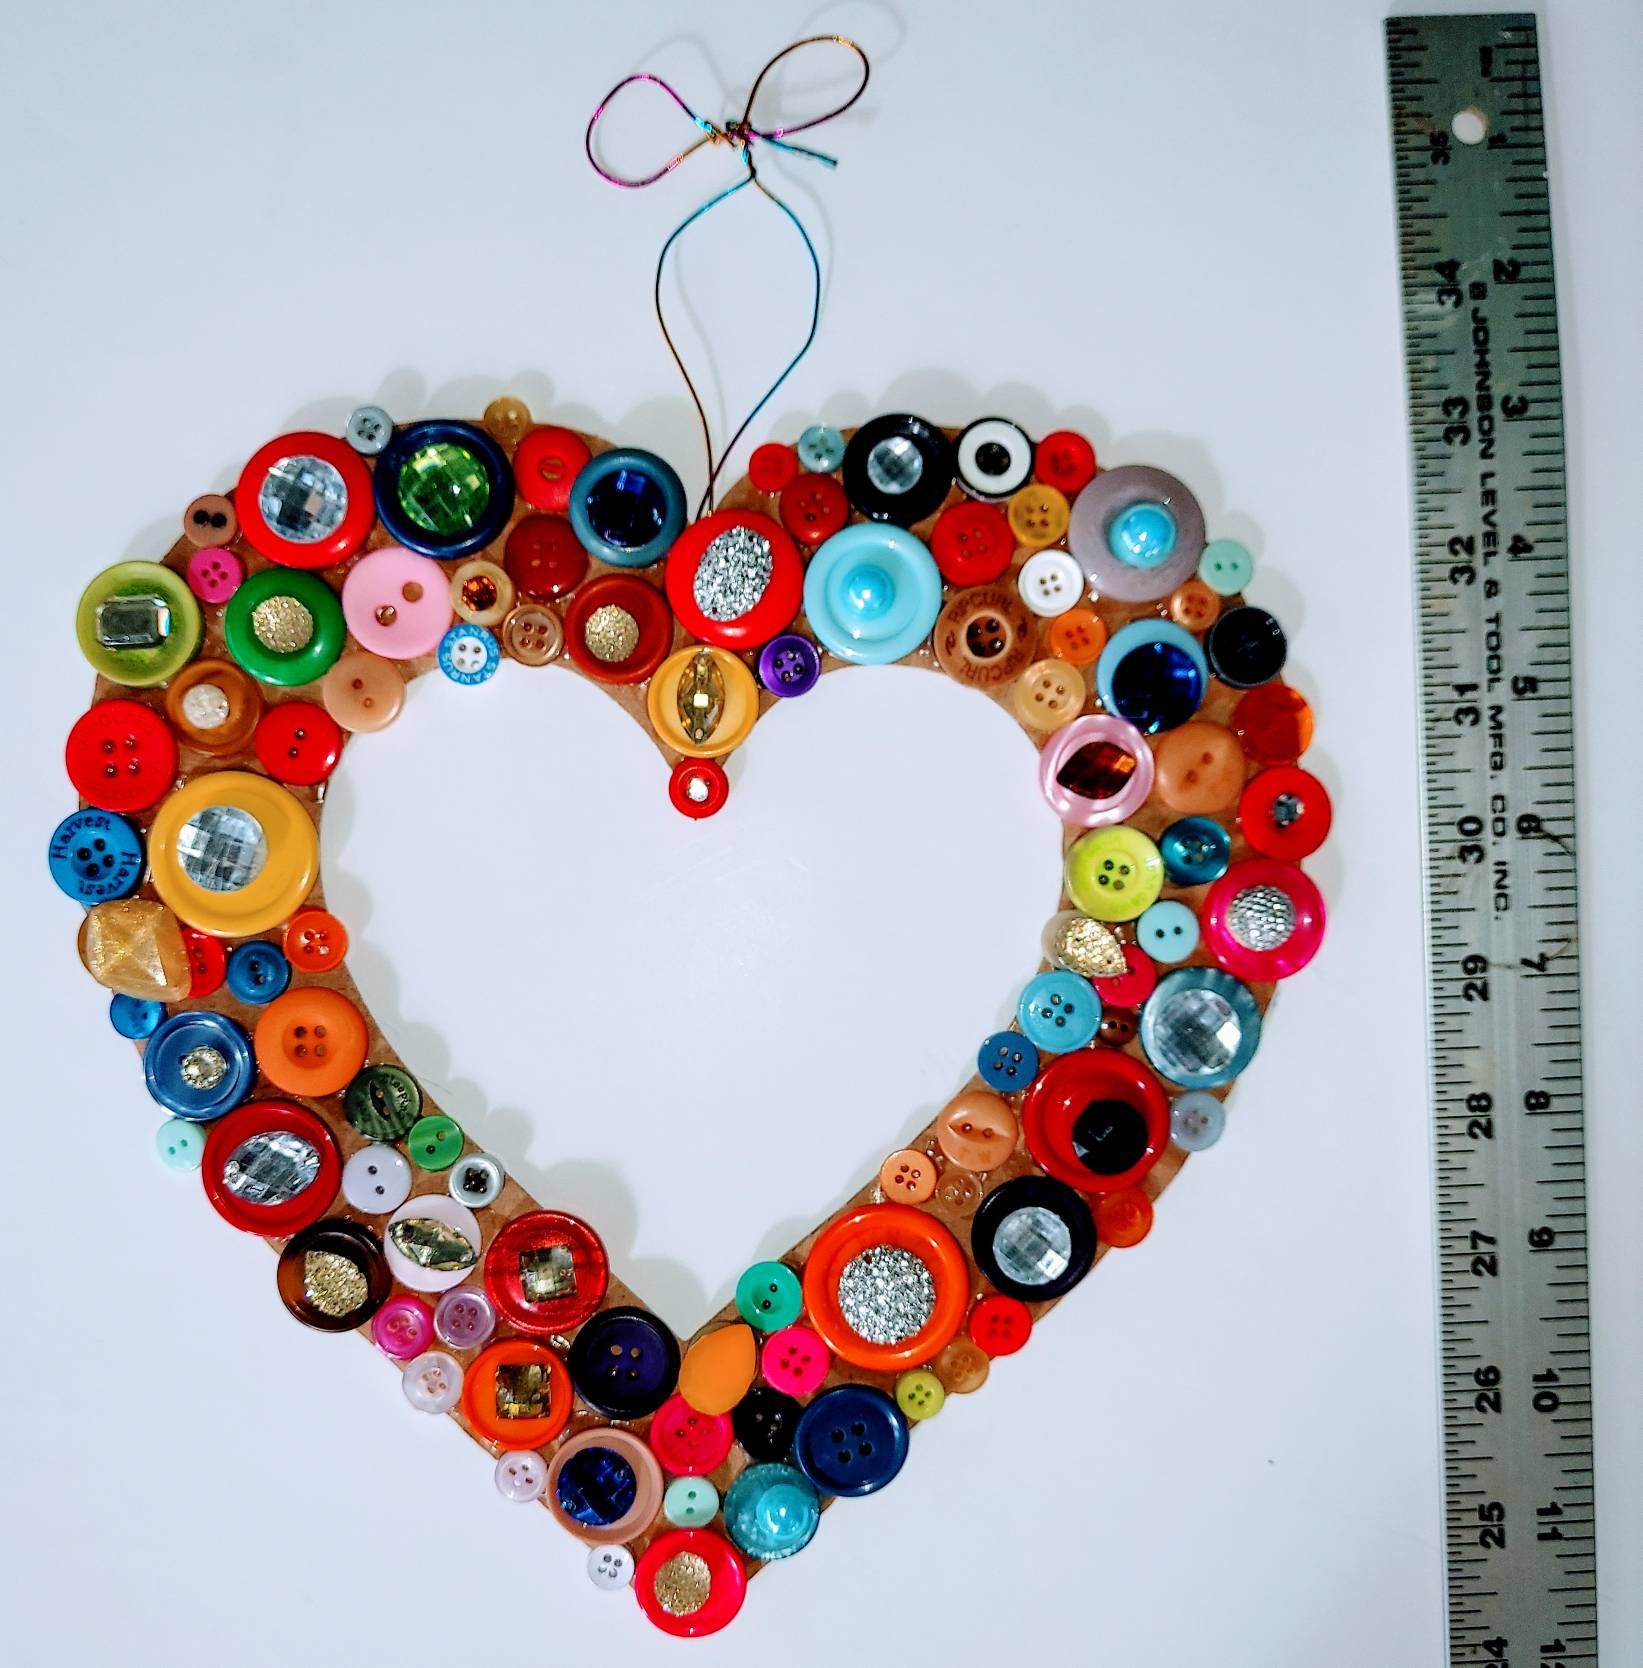 21 Brilliant Button Art Ideas and Crafts You're Gonna LOVE! - The Crazy  Craft Lady